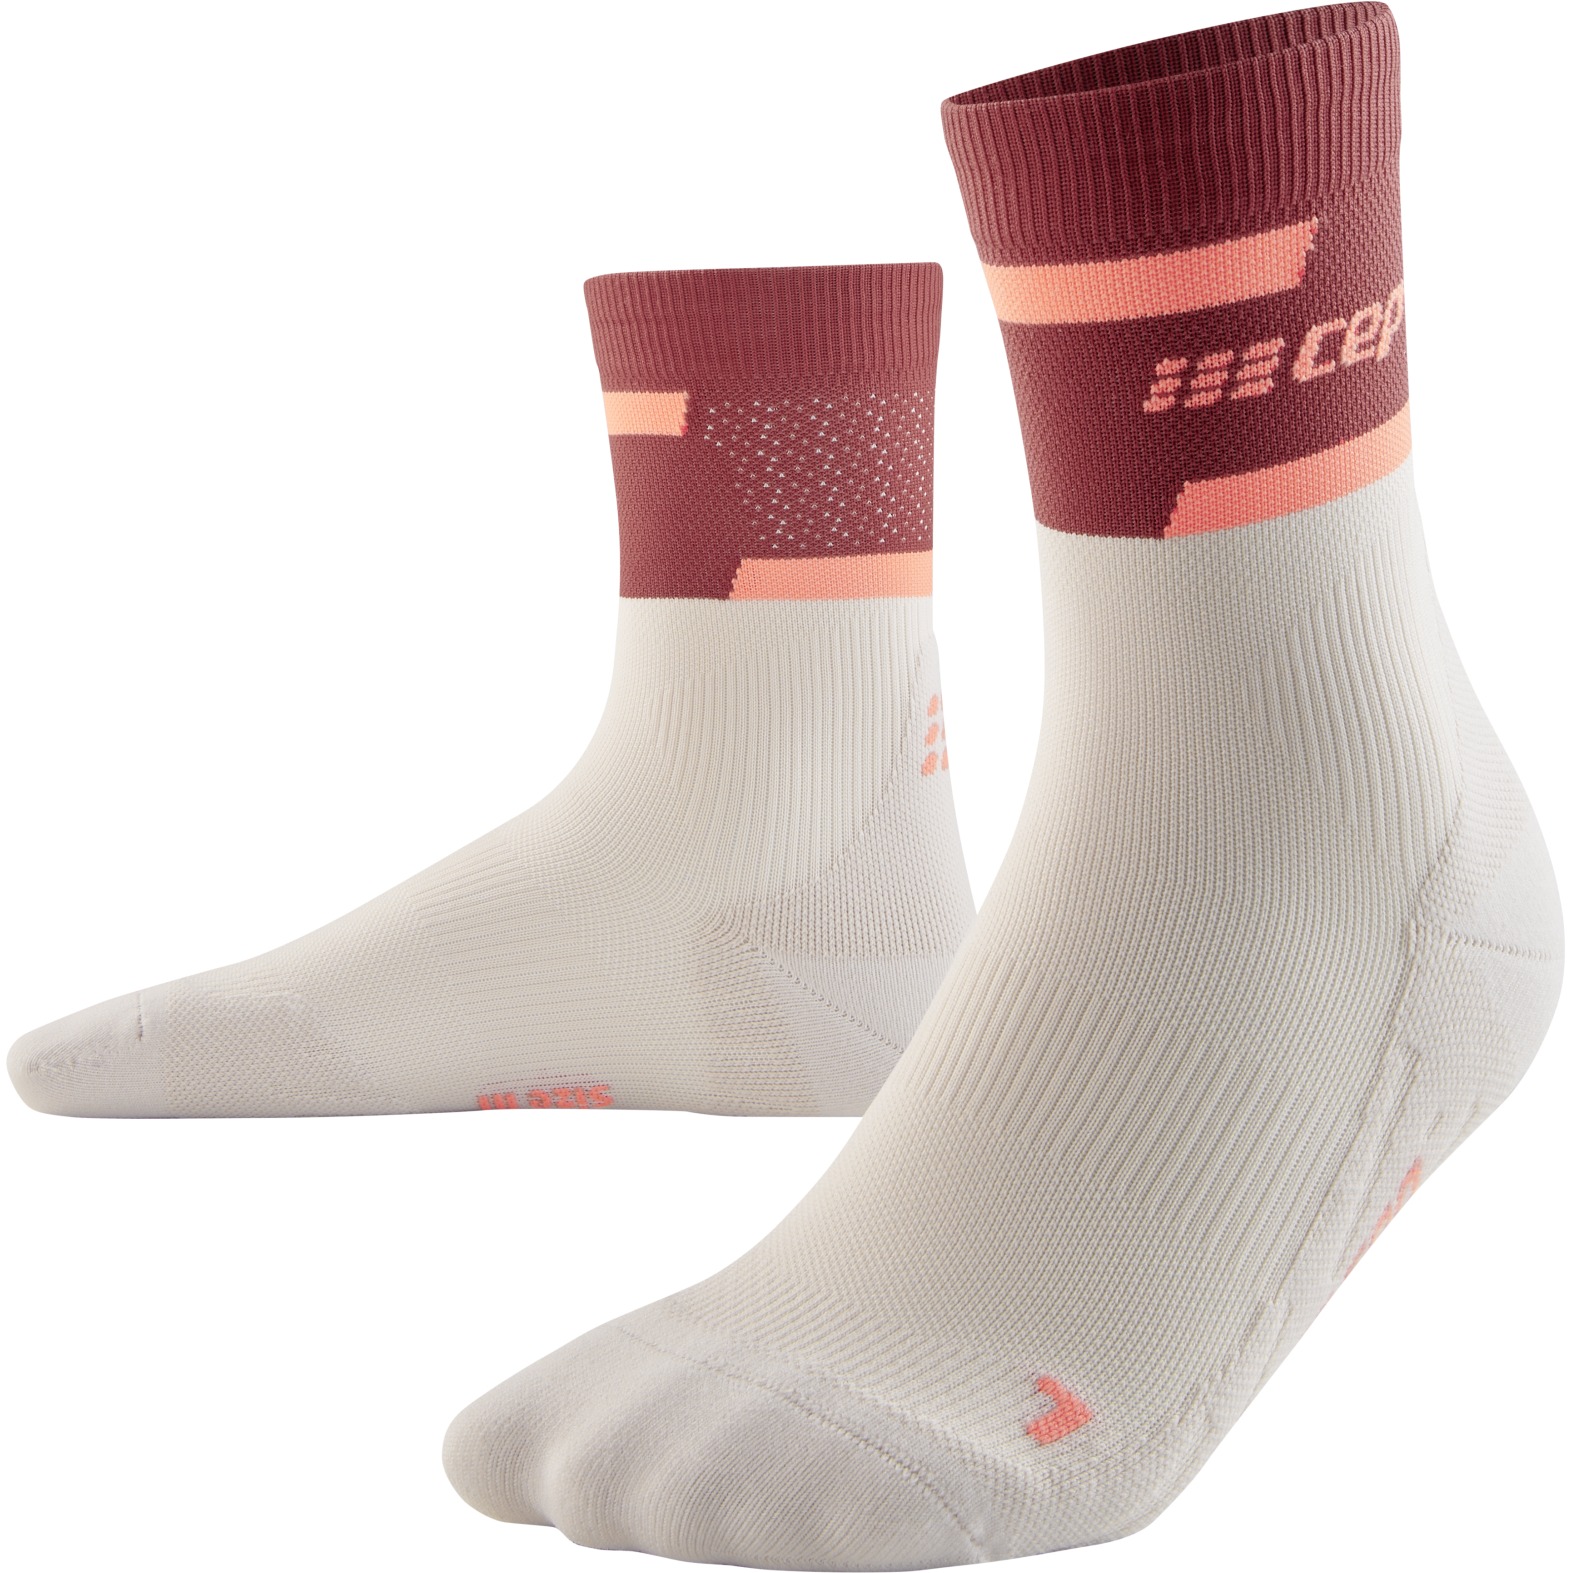 Productfoto van CEP The Run Mid Cut Compressiesokken V4 Dames - red/off white